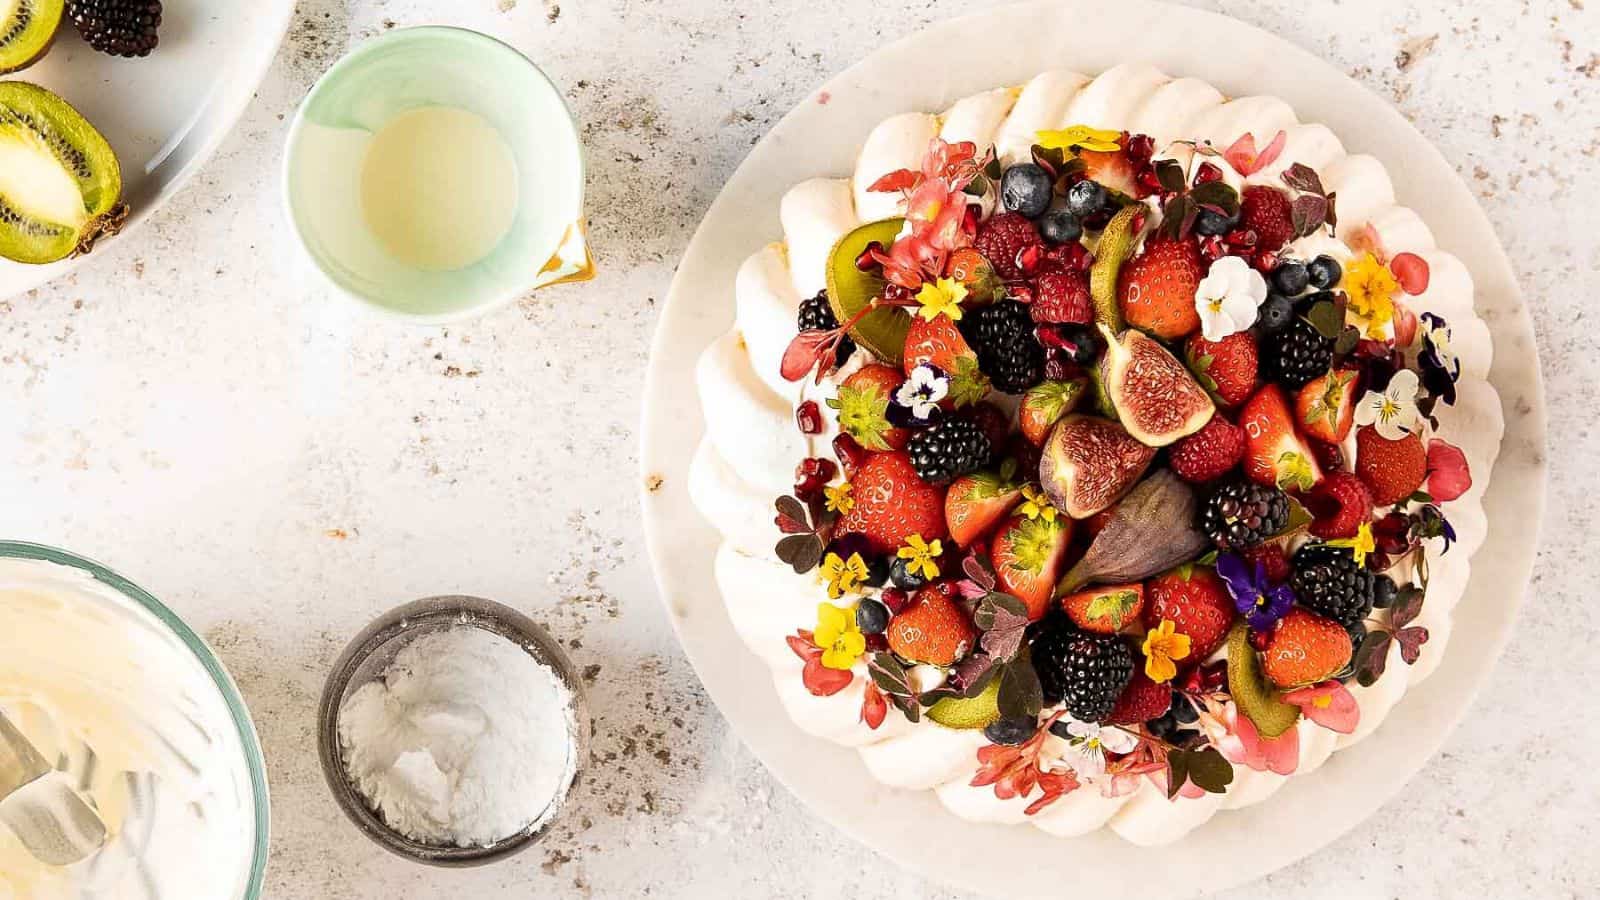 A pavlova topped with berries and figs.